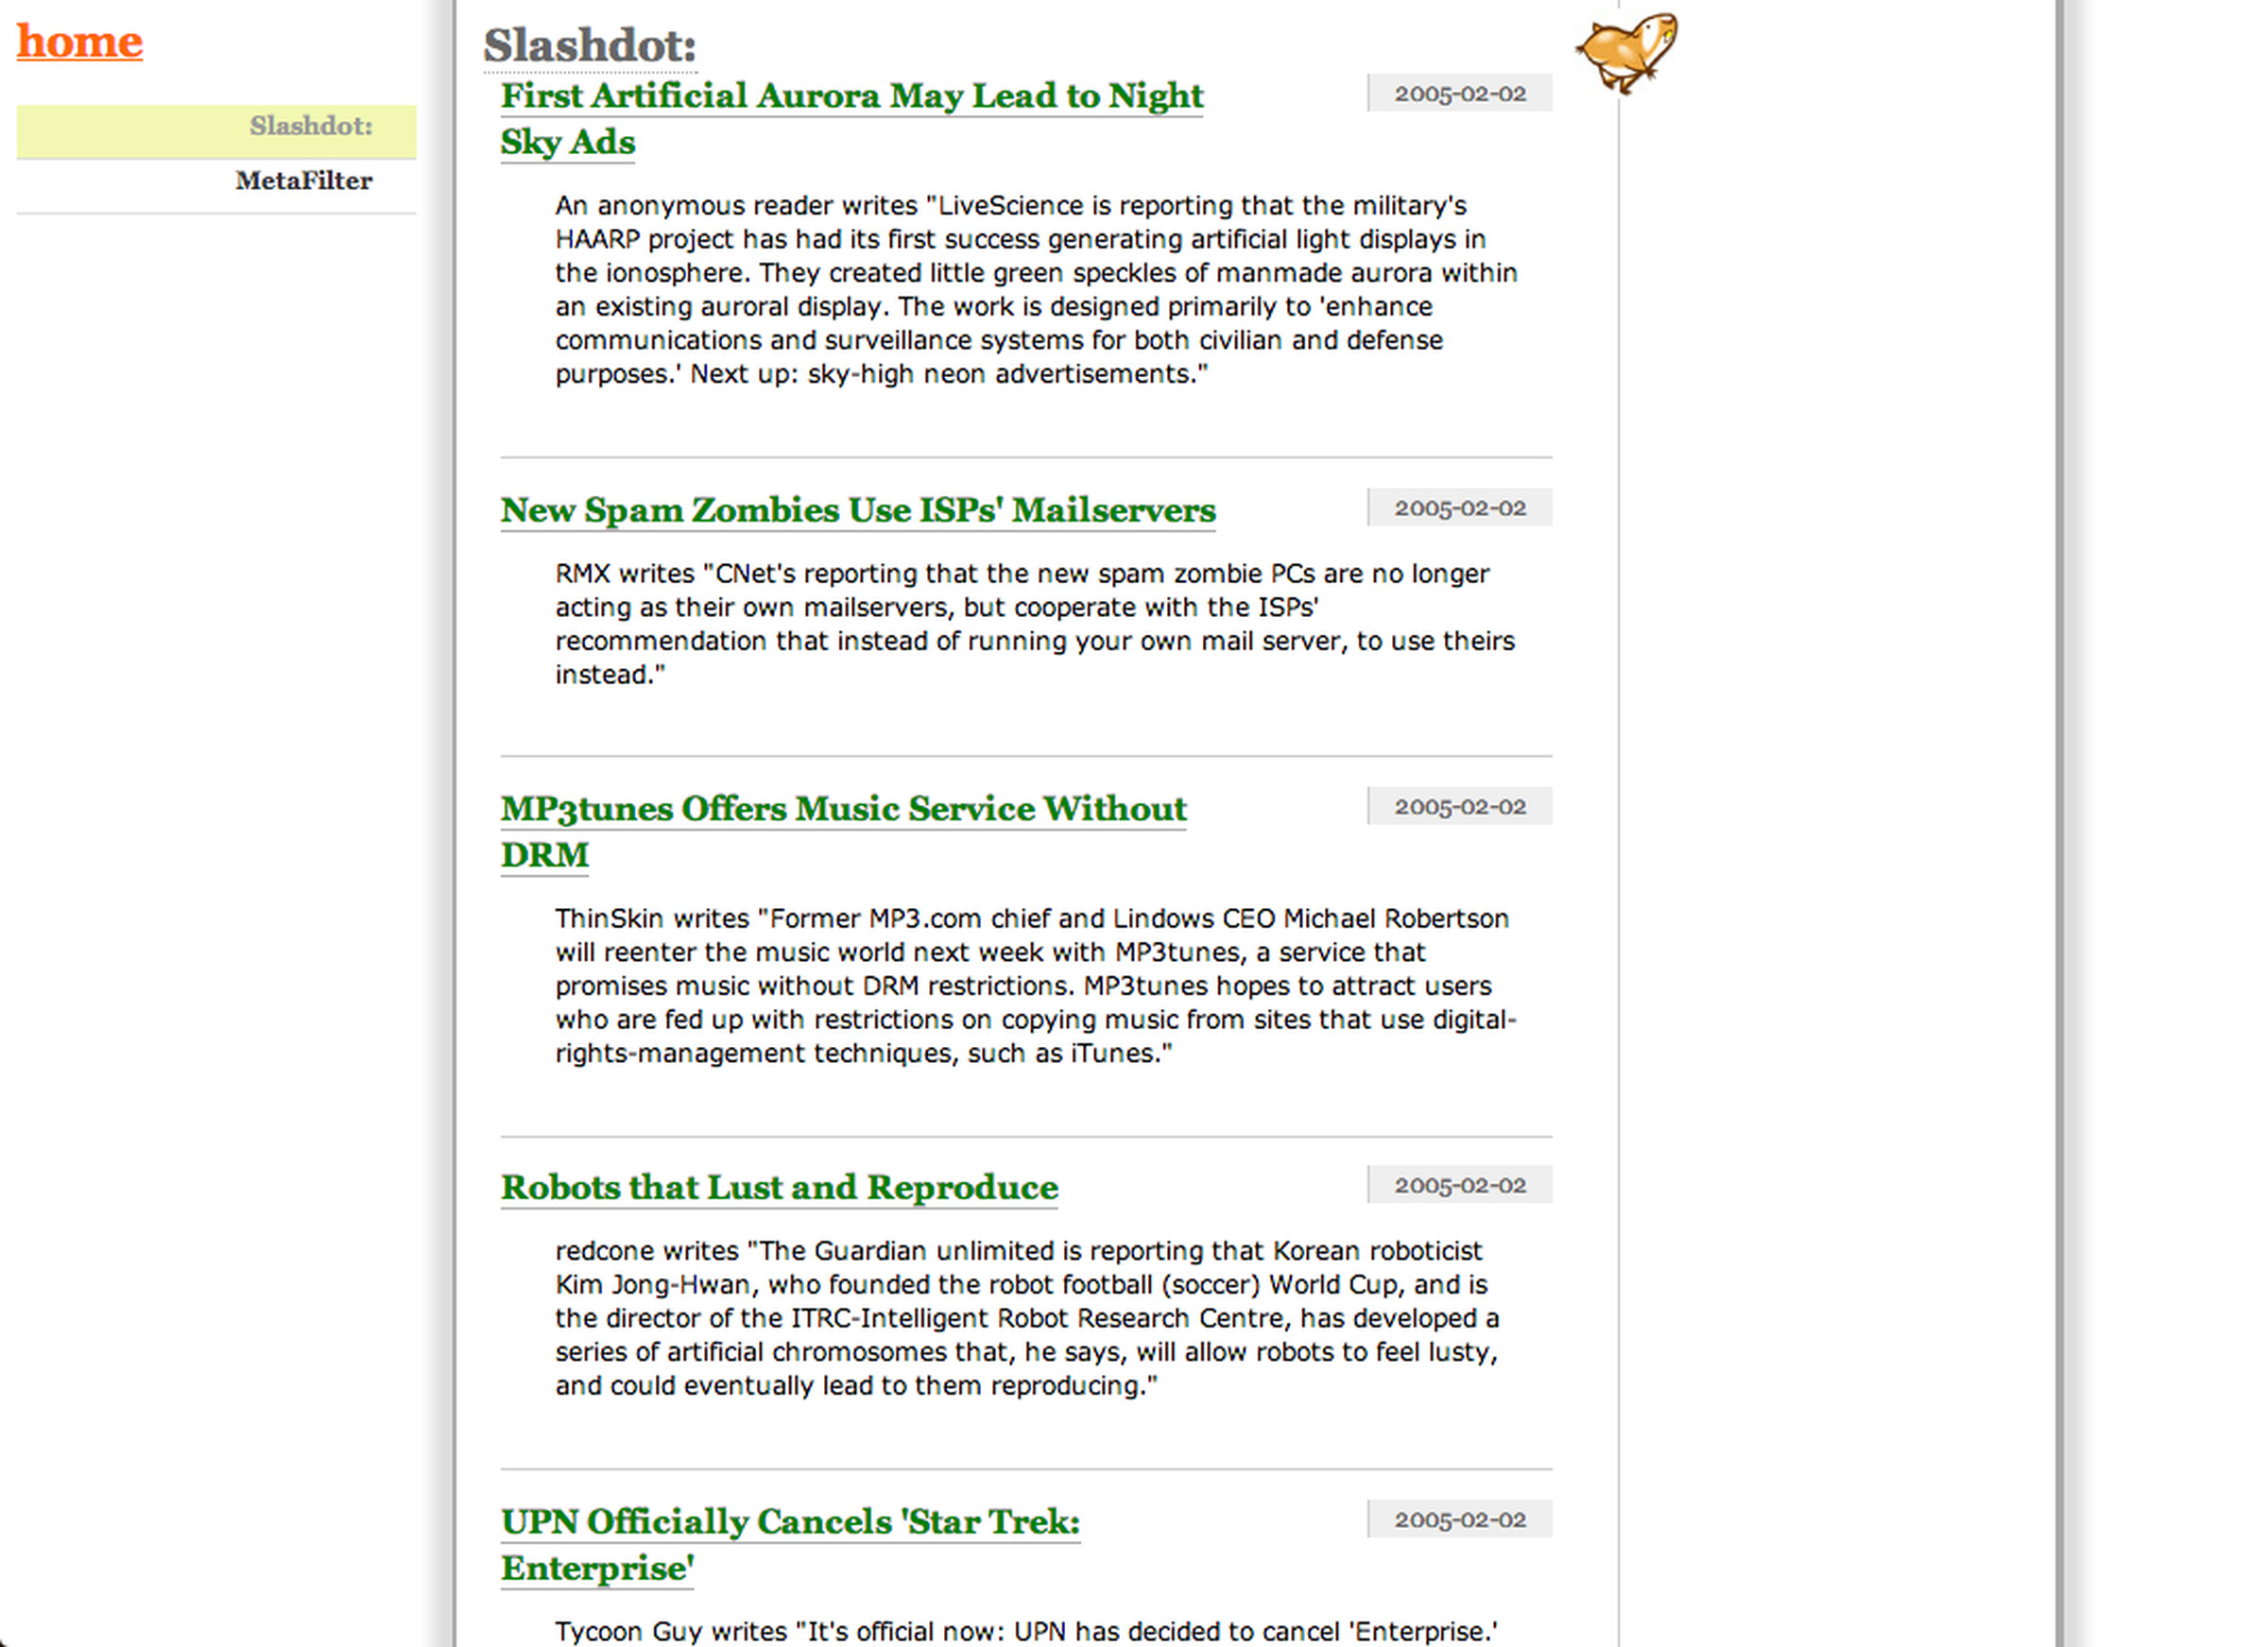 A screenshot of a prototype feed reader, showing several articles on the page.